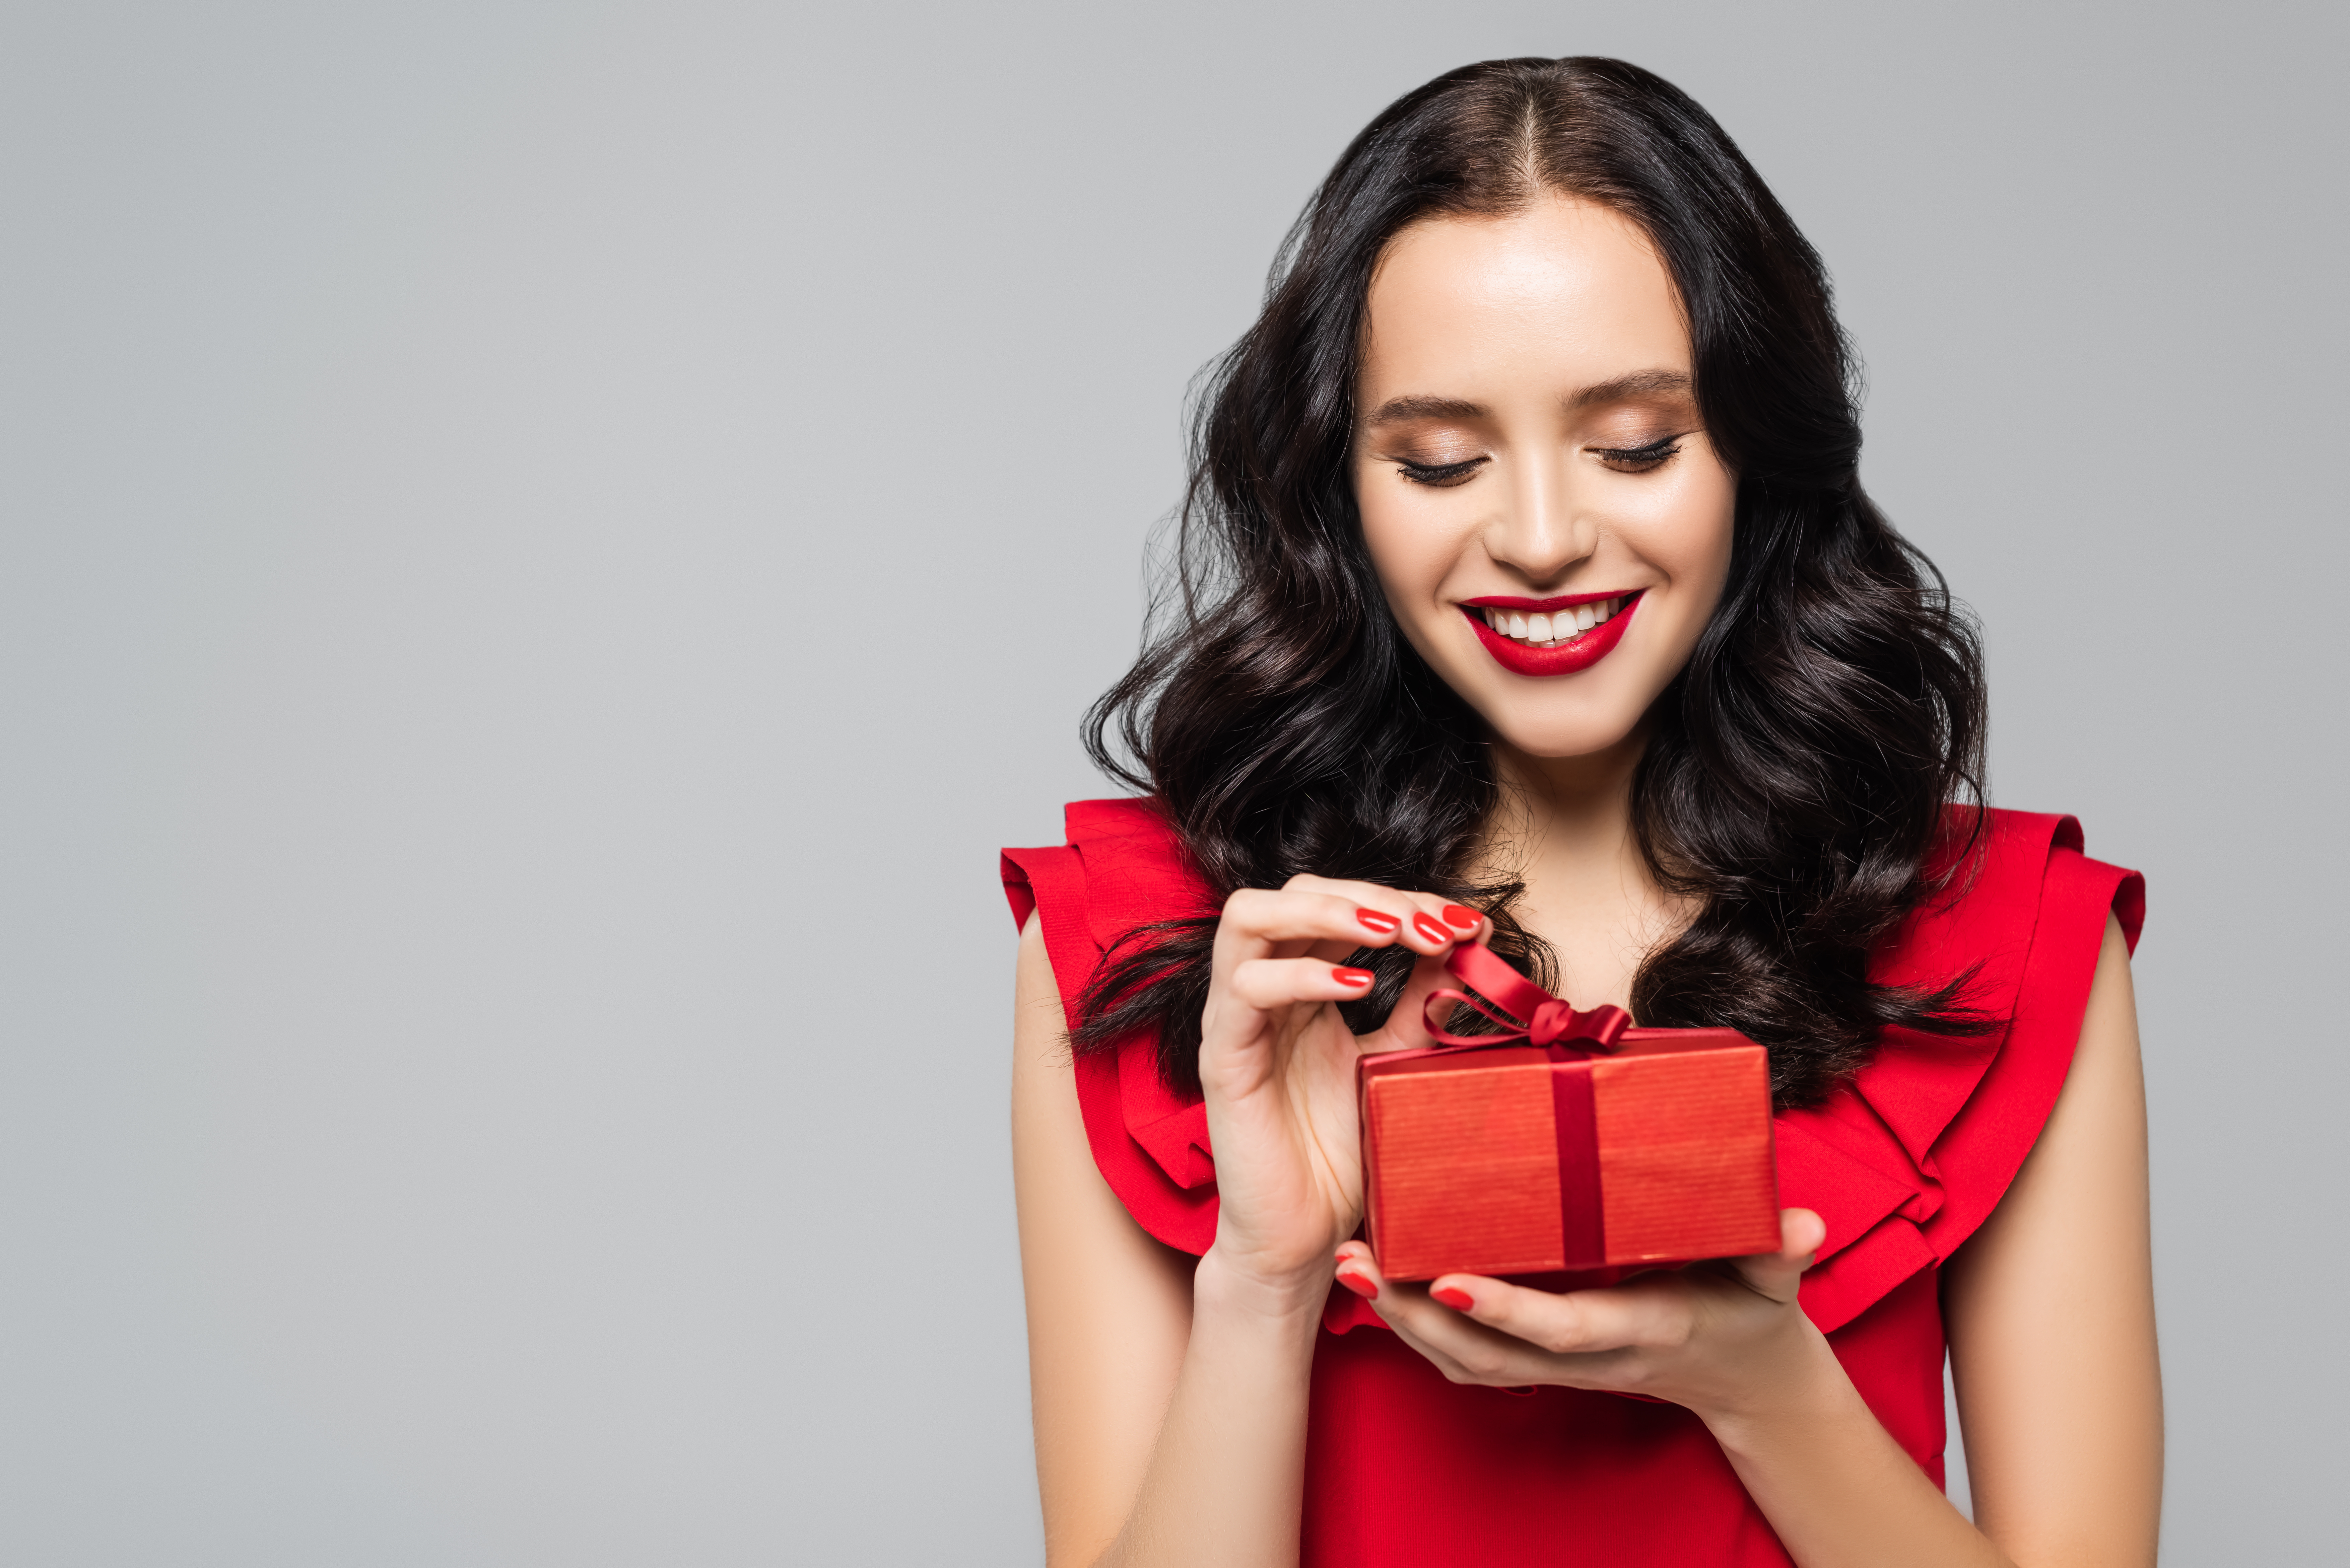 A cheerful woman in a red dress is seen holding a gift box | Source: Shutterstock